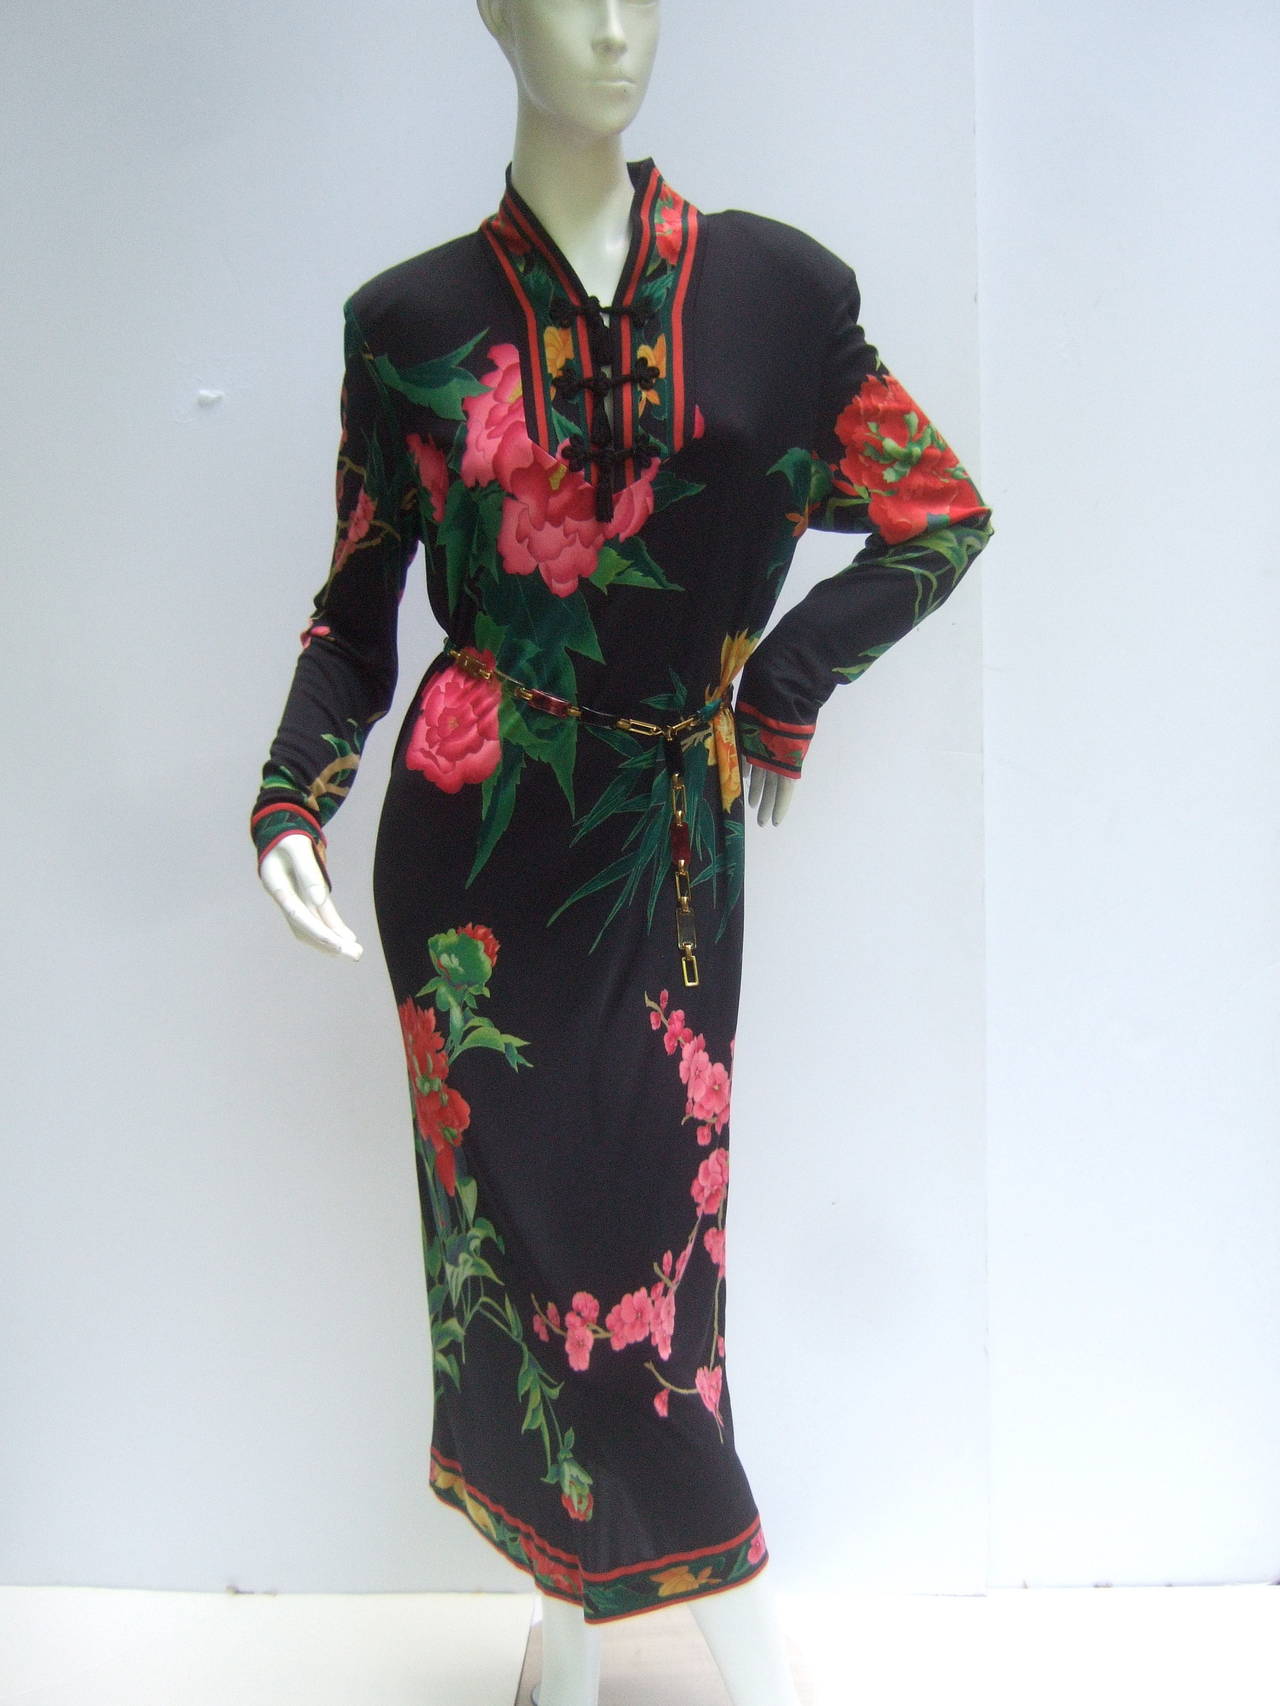 Leonard Paris Silk jersey floral print dress Made in Italy c 1980s
The elegant designer dress is illustrated with a field of lush flower
blooms that illuminate against the black silk jersey background

The collar is designed with three sets of black